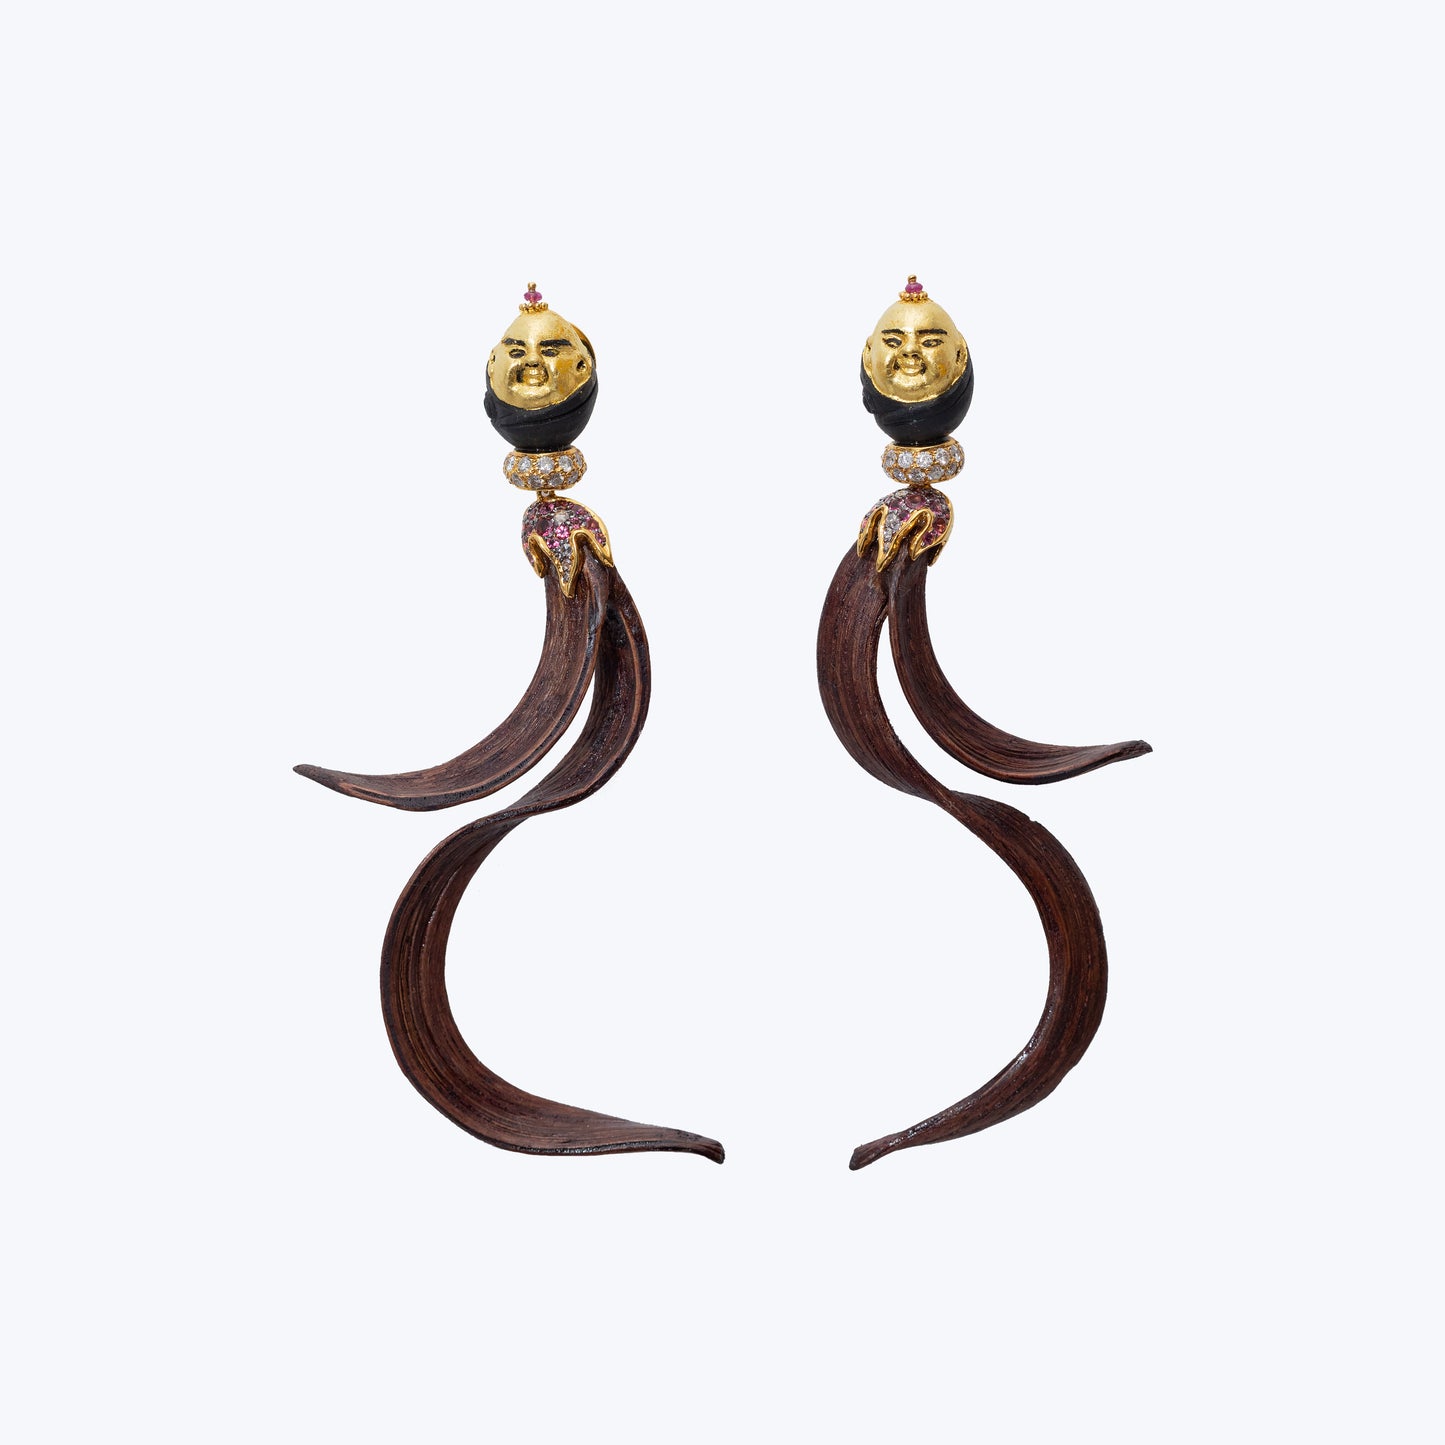 Asia Happy Monk Earrings with Crazy Wood, Pink Tourmaline and Diamond